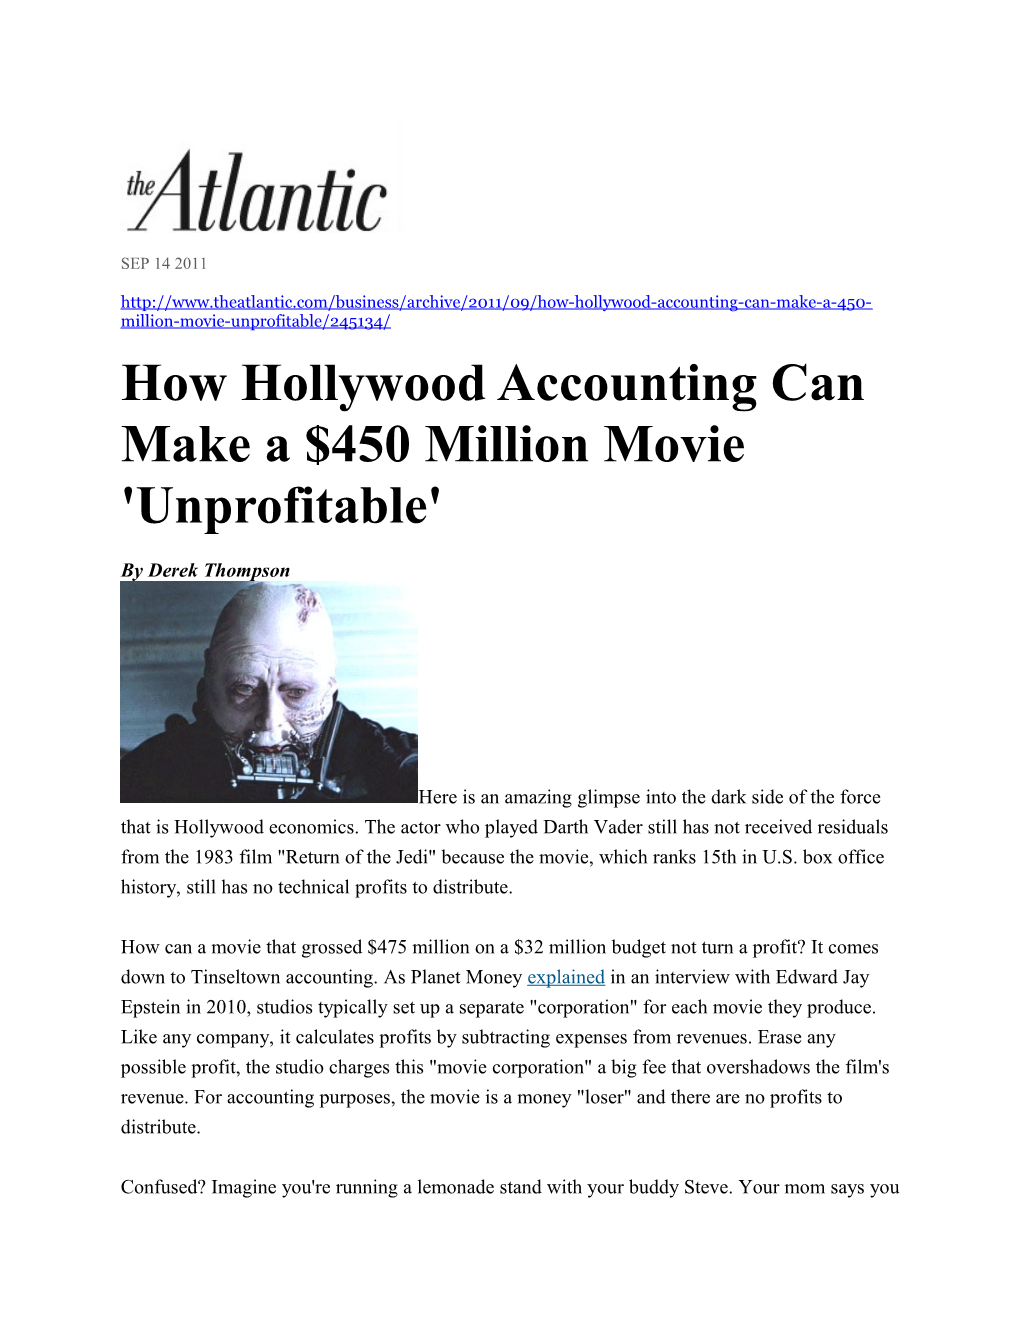 How Hollywood Accounting Can Make a $450 Million Movie 'Unprofitable'